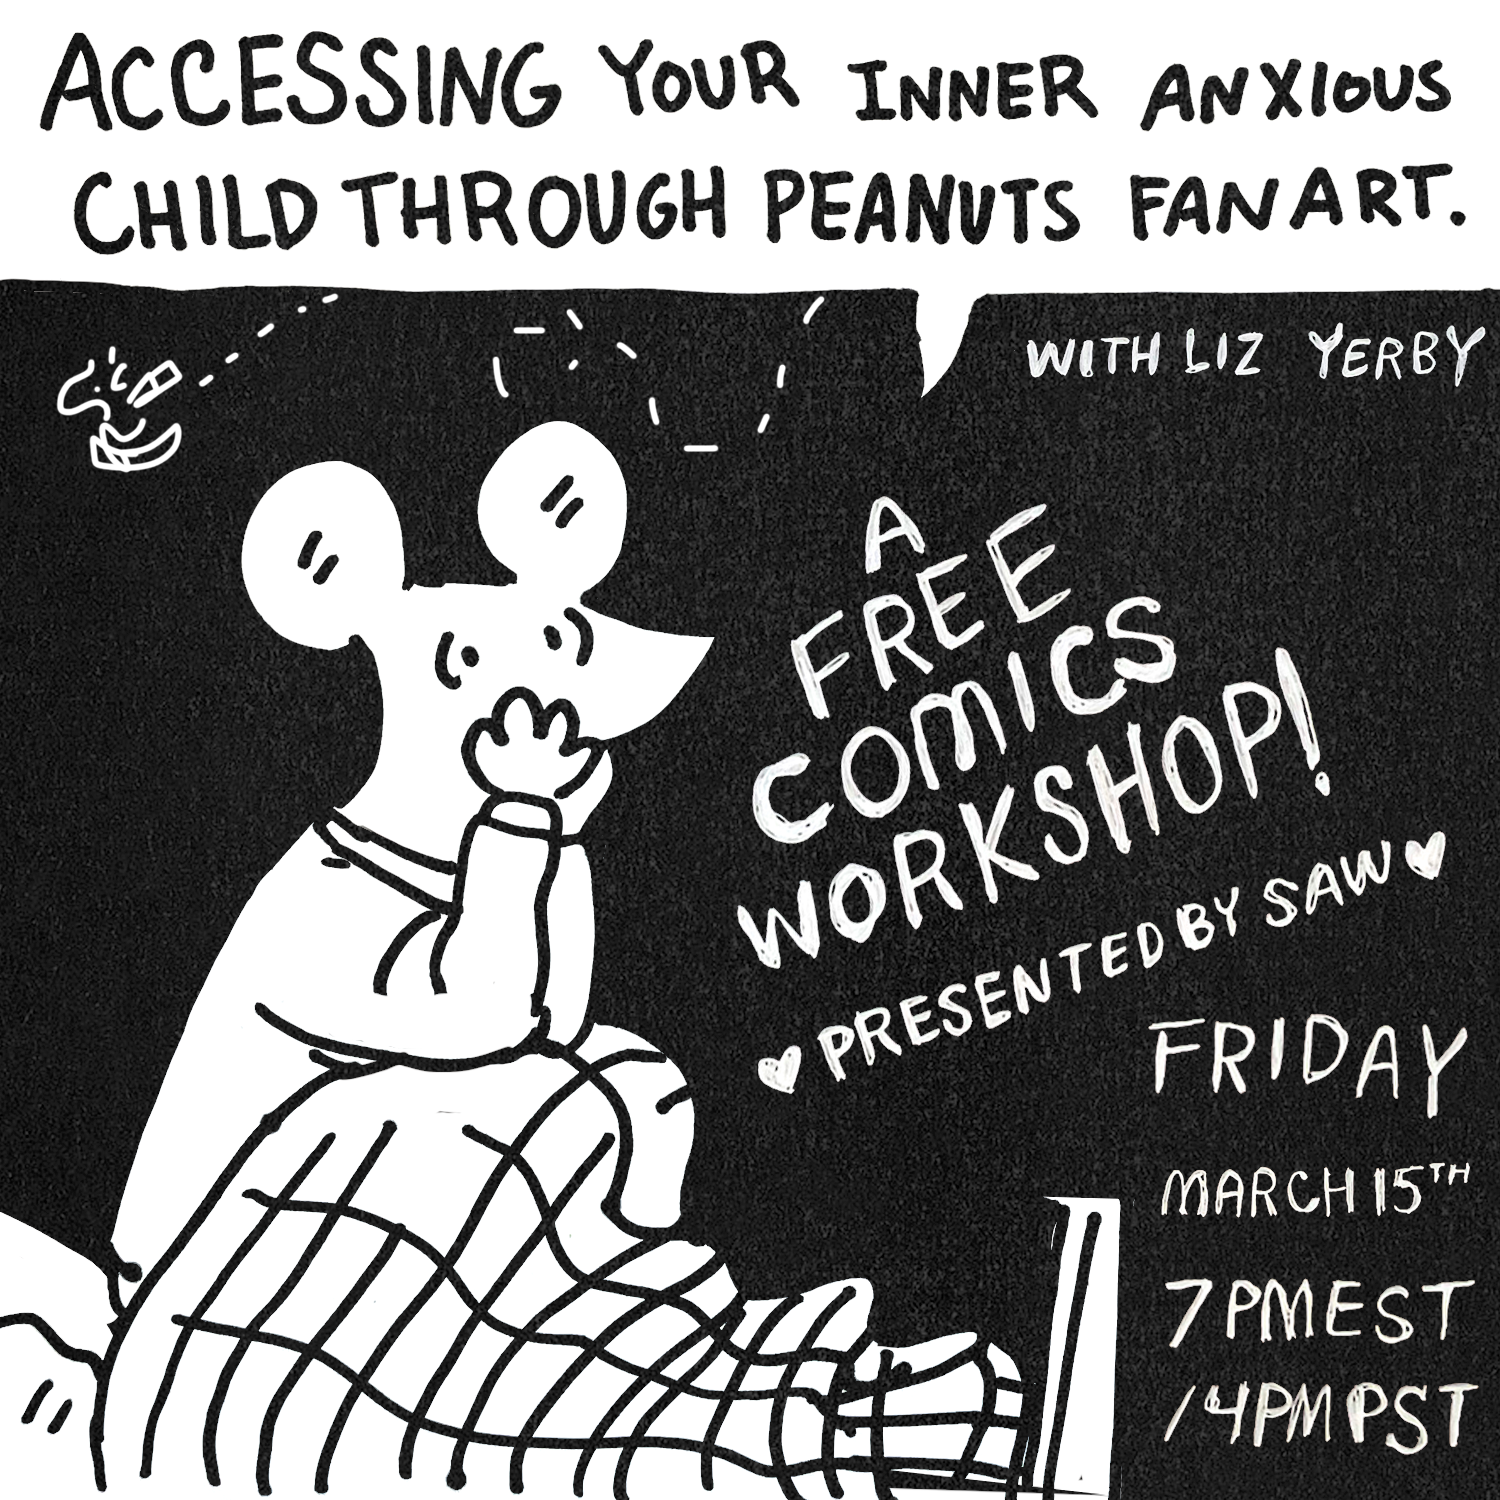 Workshop promo in black and white: "Accessing Your Inner Anxious Child Through Peanuts Fan Art with Liz Yerby
A Free Comics Workshop presented by SAW
Friday March 15th 7pm EST / 4pm PST"
Over a black background, a white mouse sitting up in bed looking anxious.